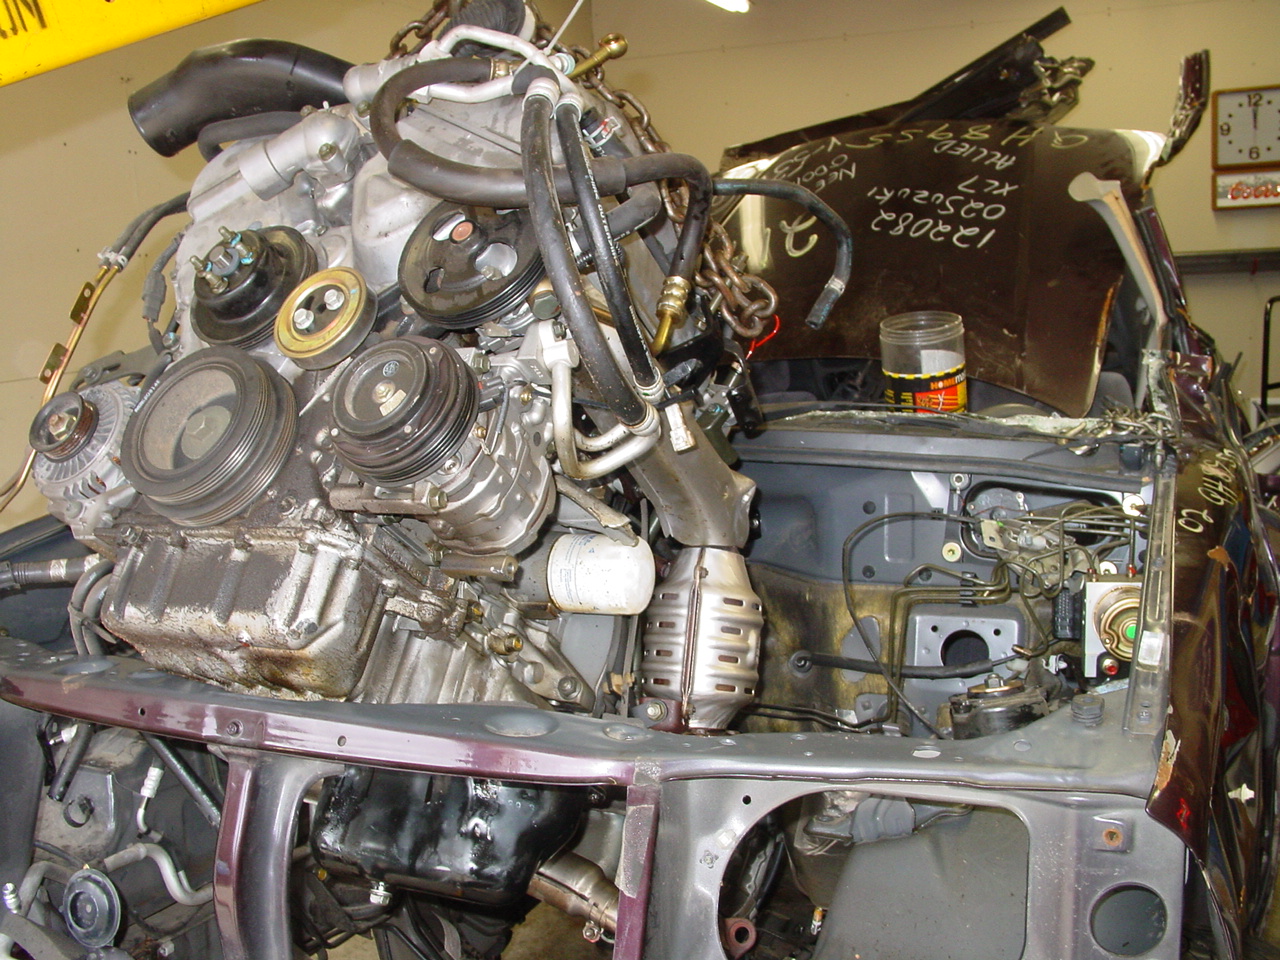 The 2.7-liter engine from the XL7